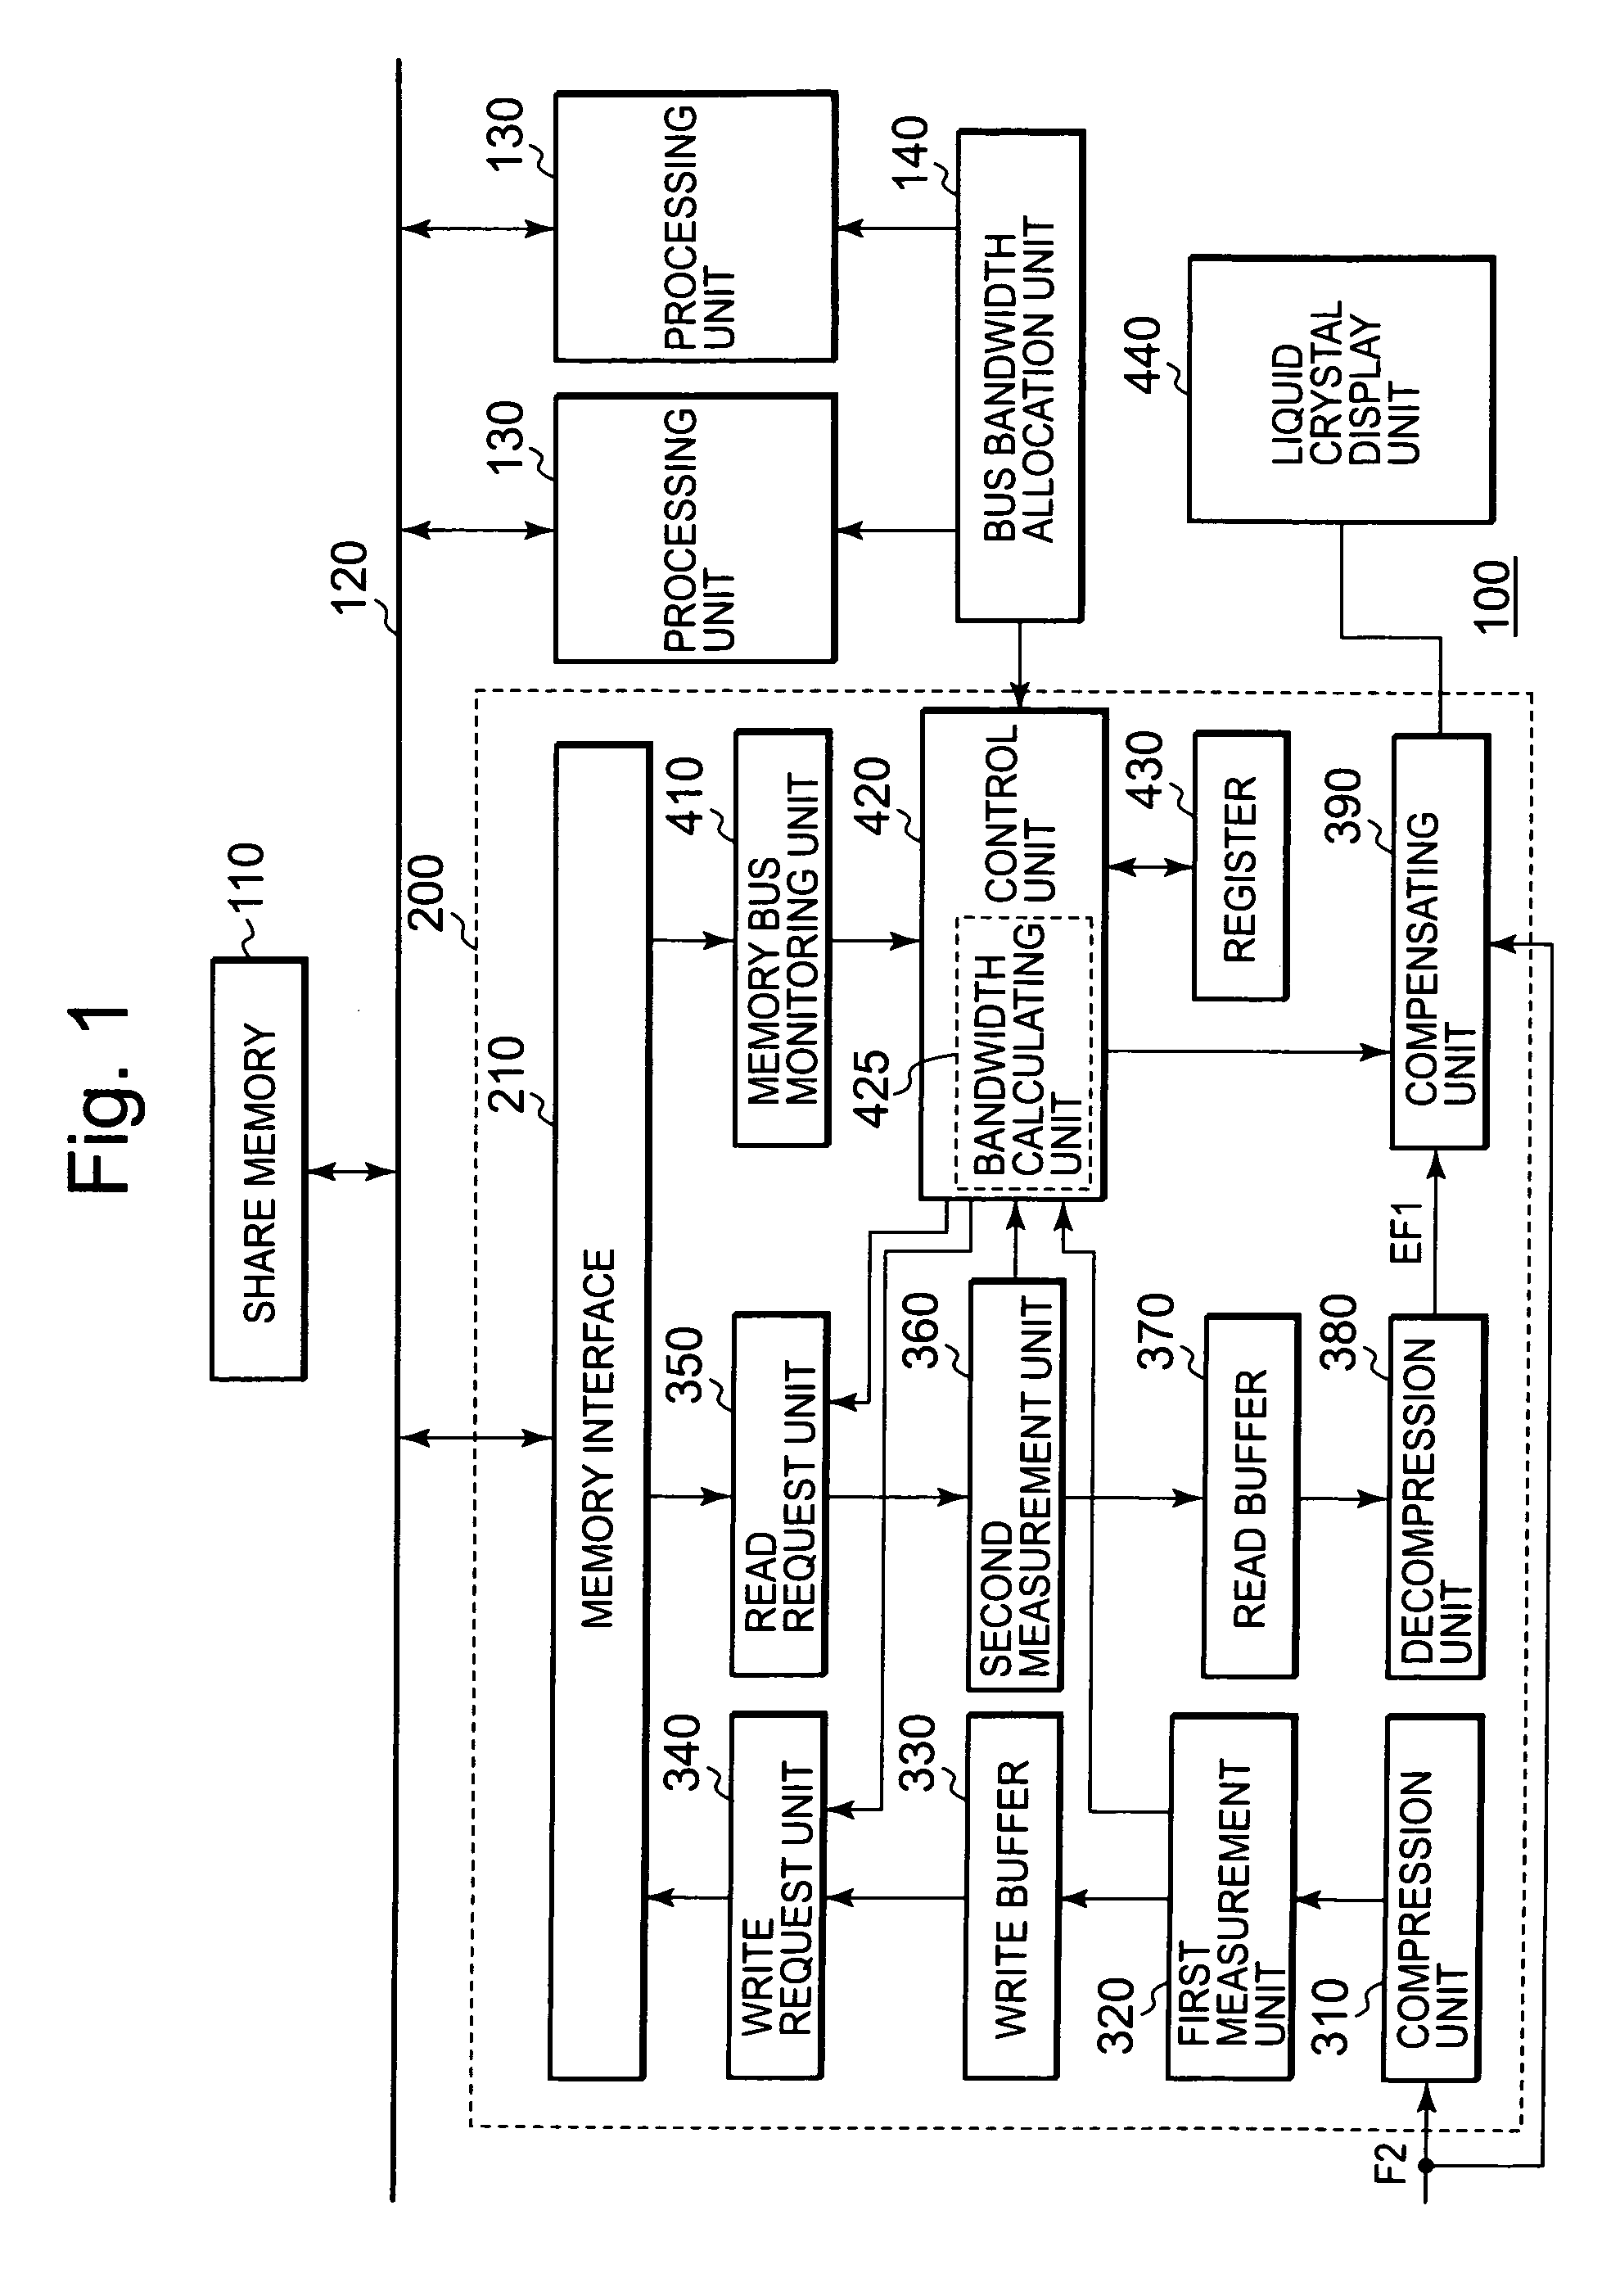 Image processing apparatus for reading compressed data from and writing to memory via data bus and image processing method